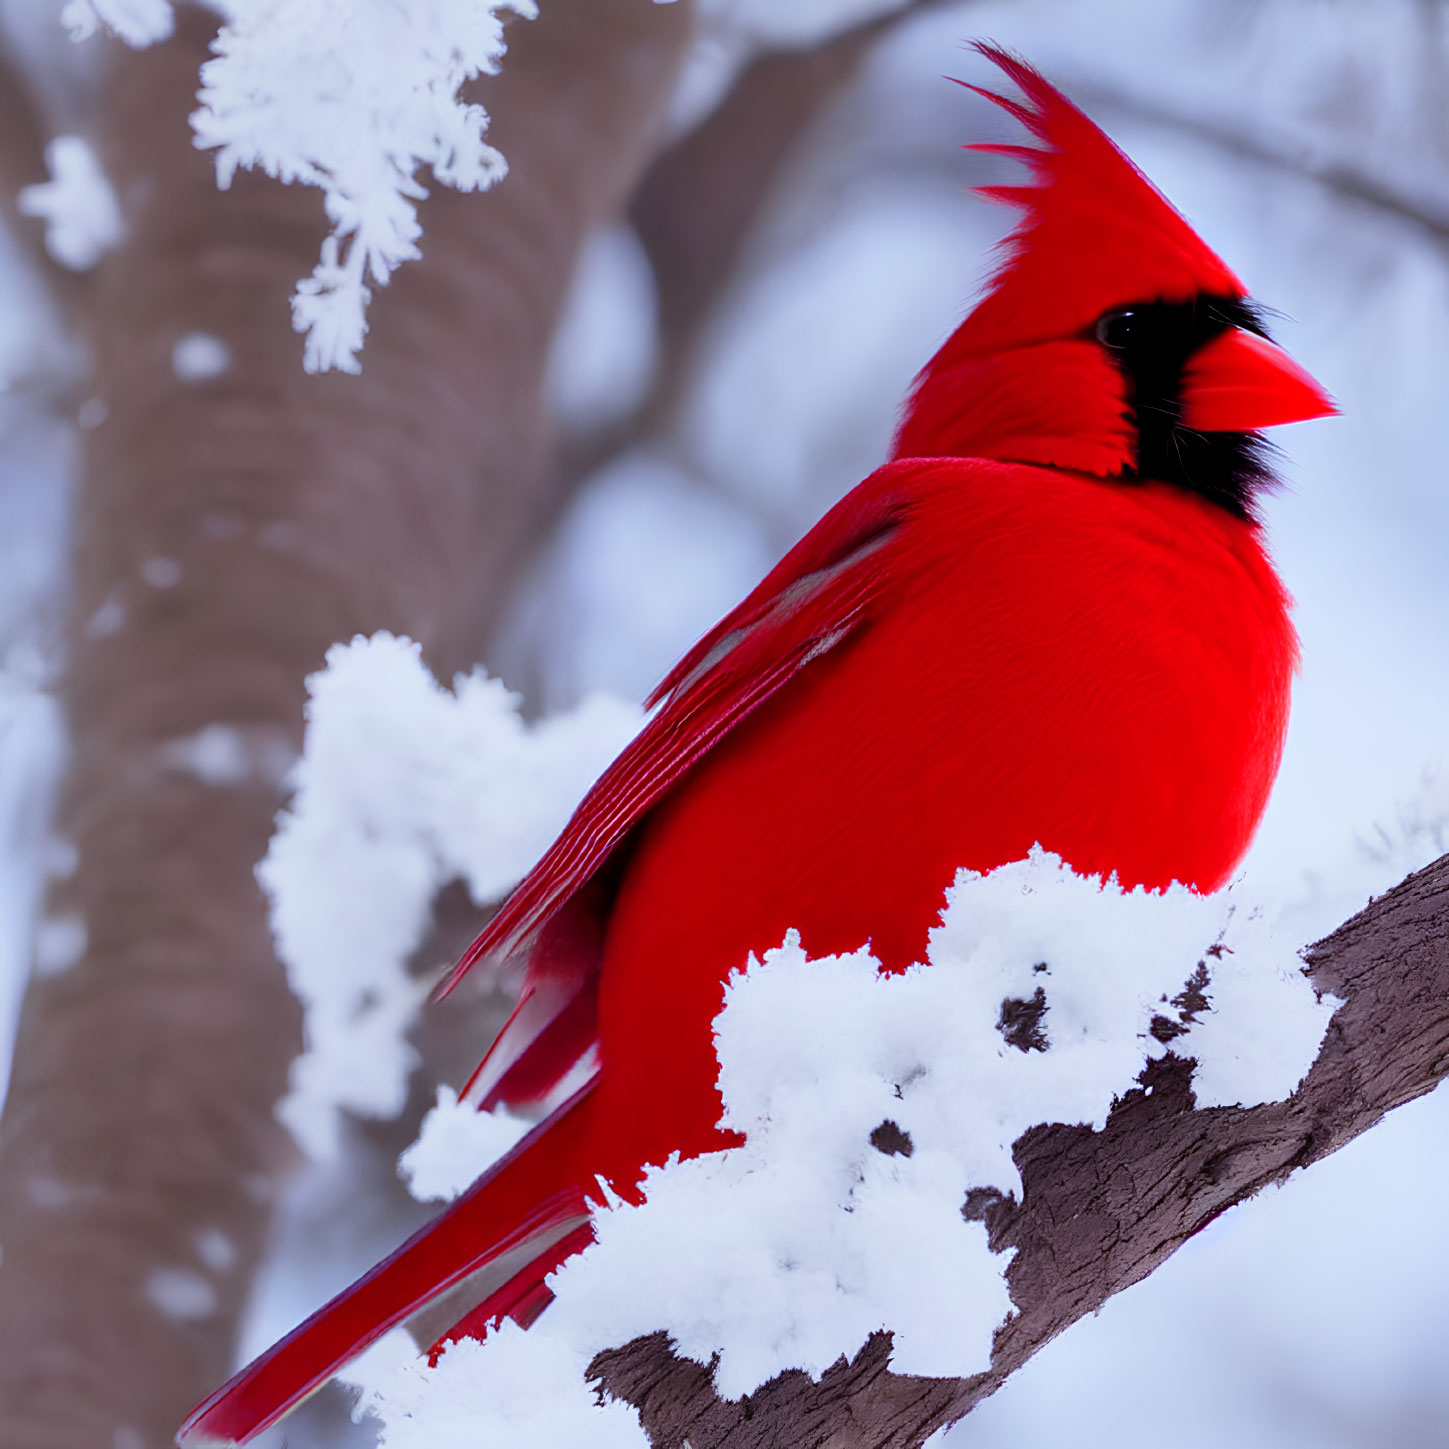 Red cardinal on snowy branch with frost-covered twigs against soft-focus background